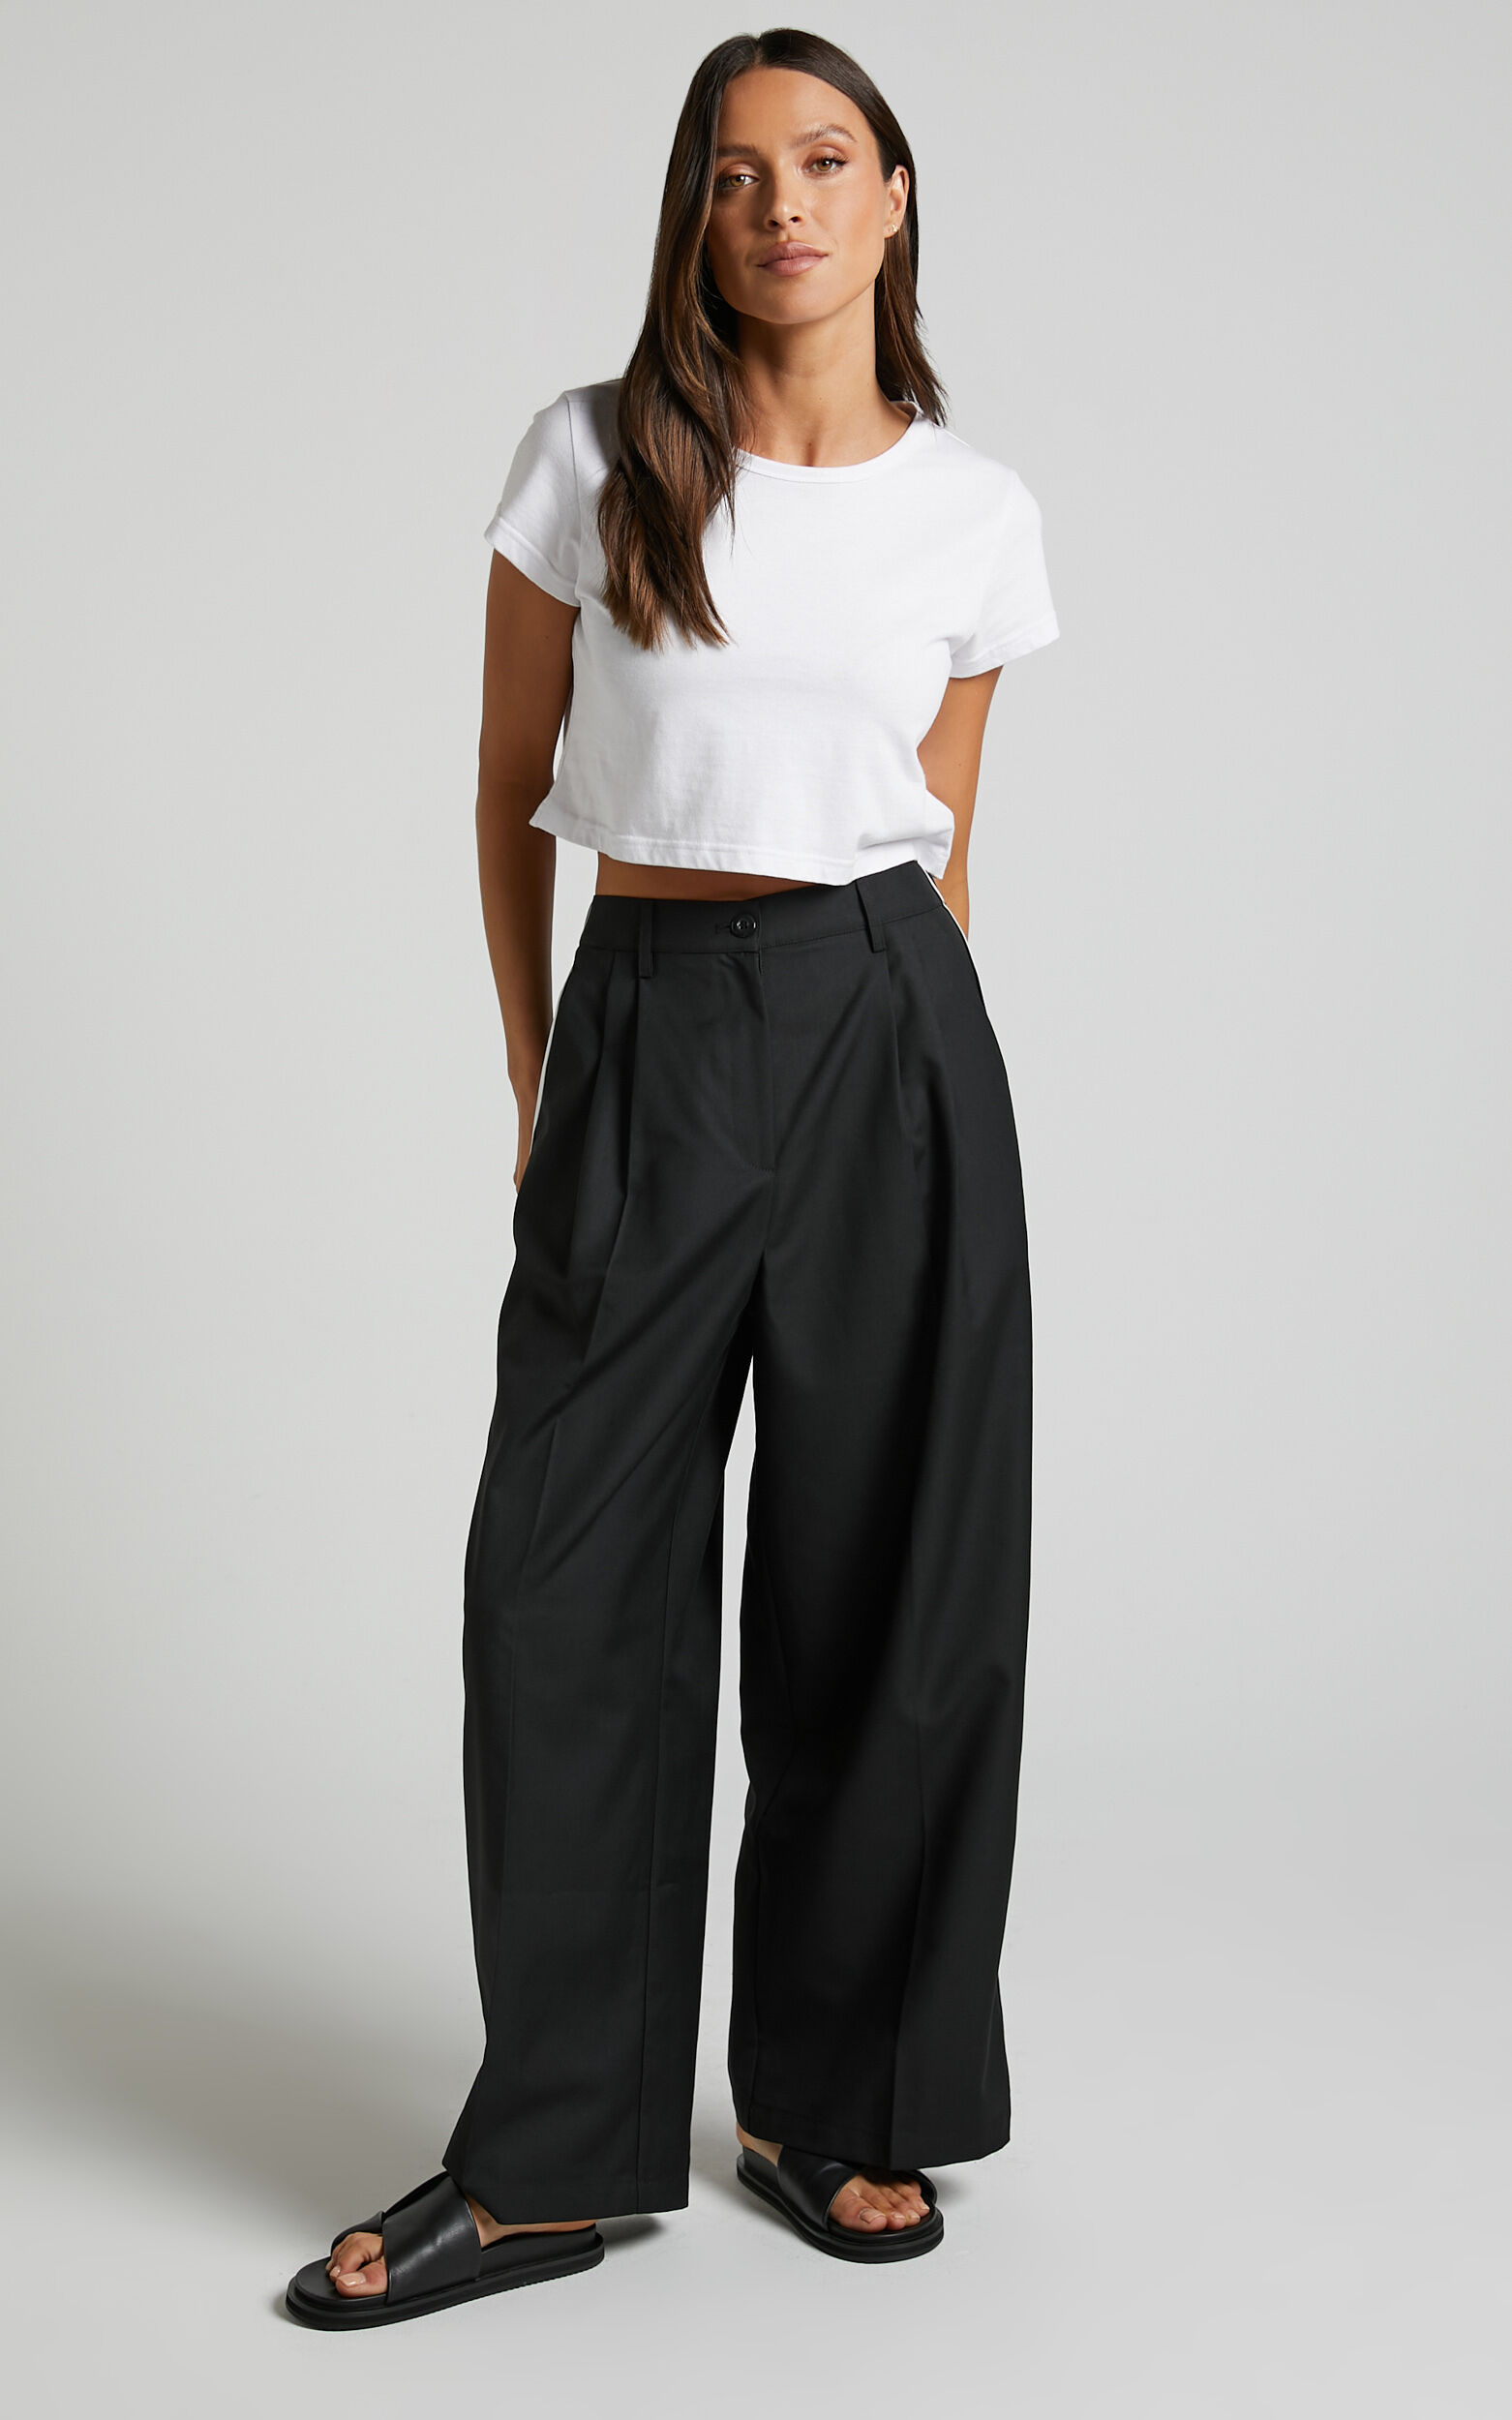 LIONESS - OFF DUTY PANT in ONYX | Showpo USA